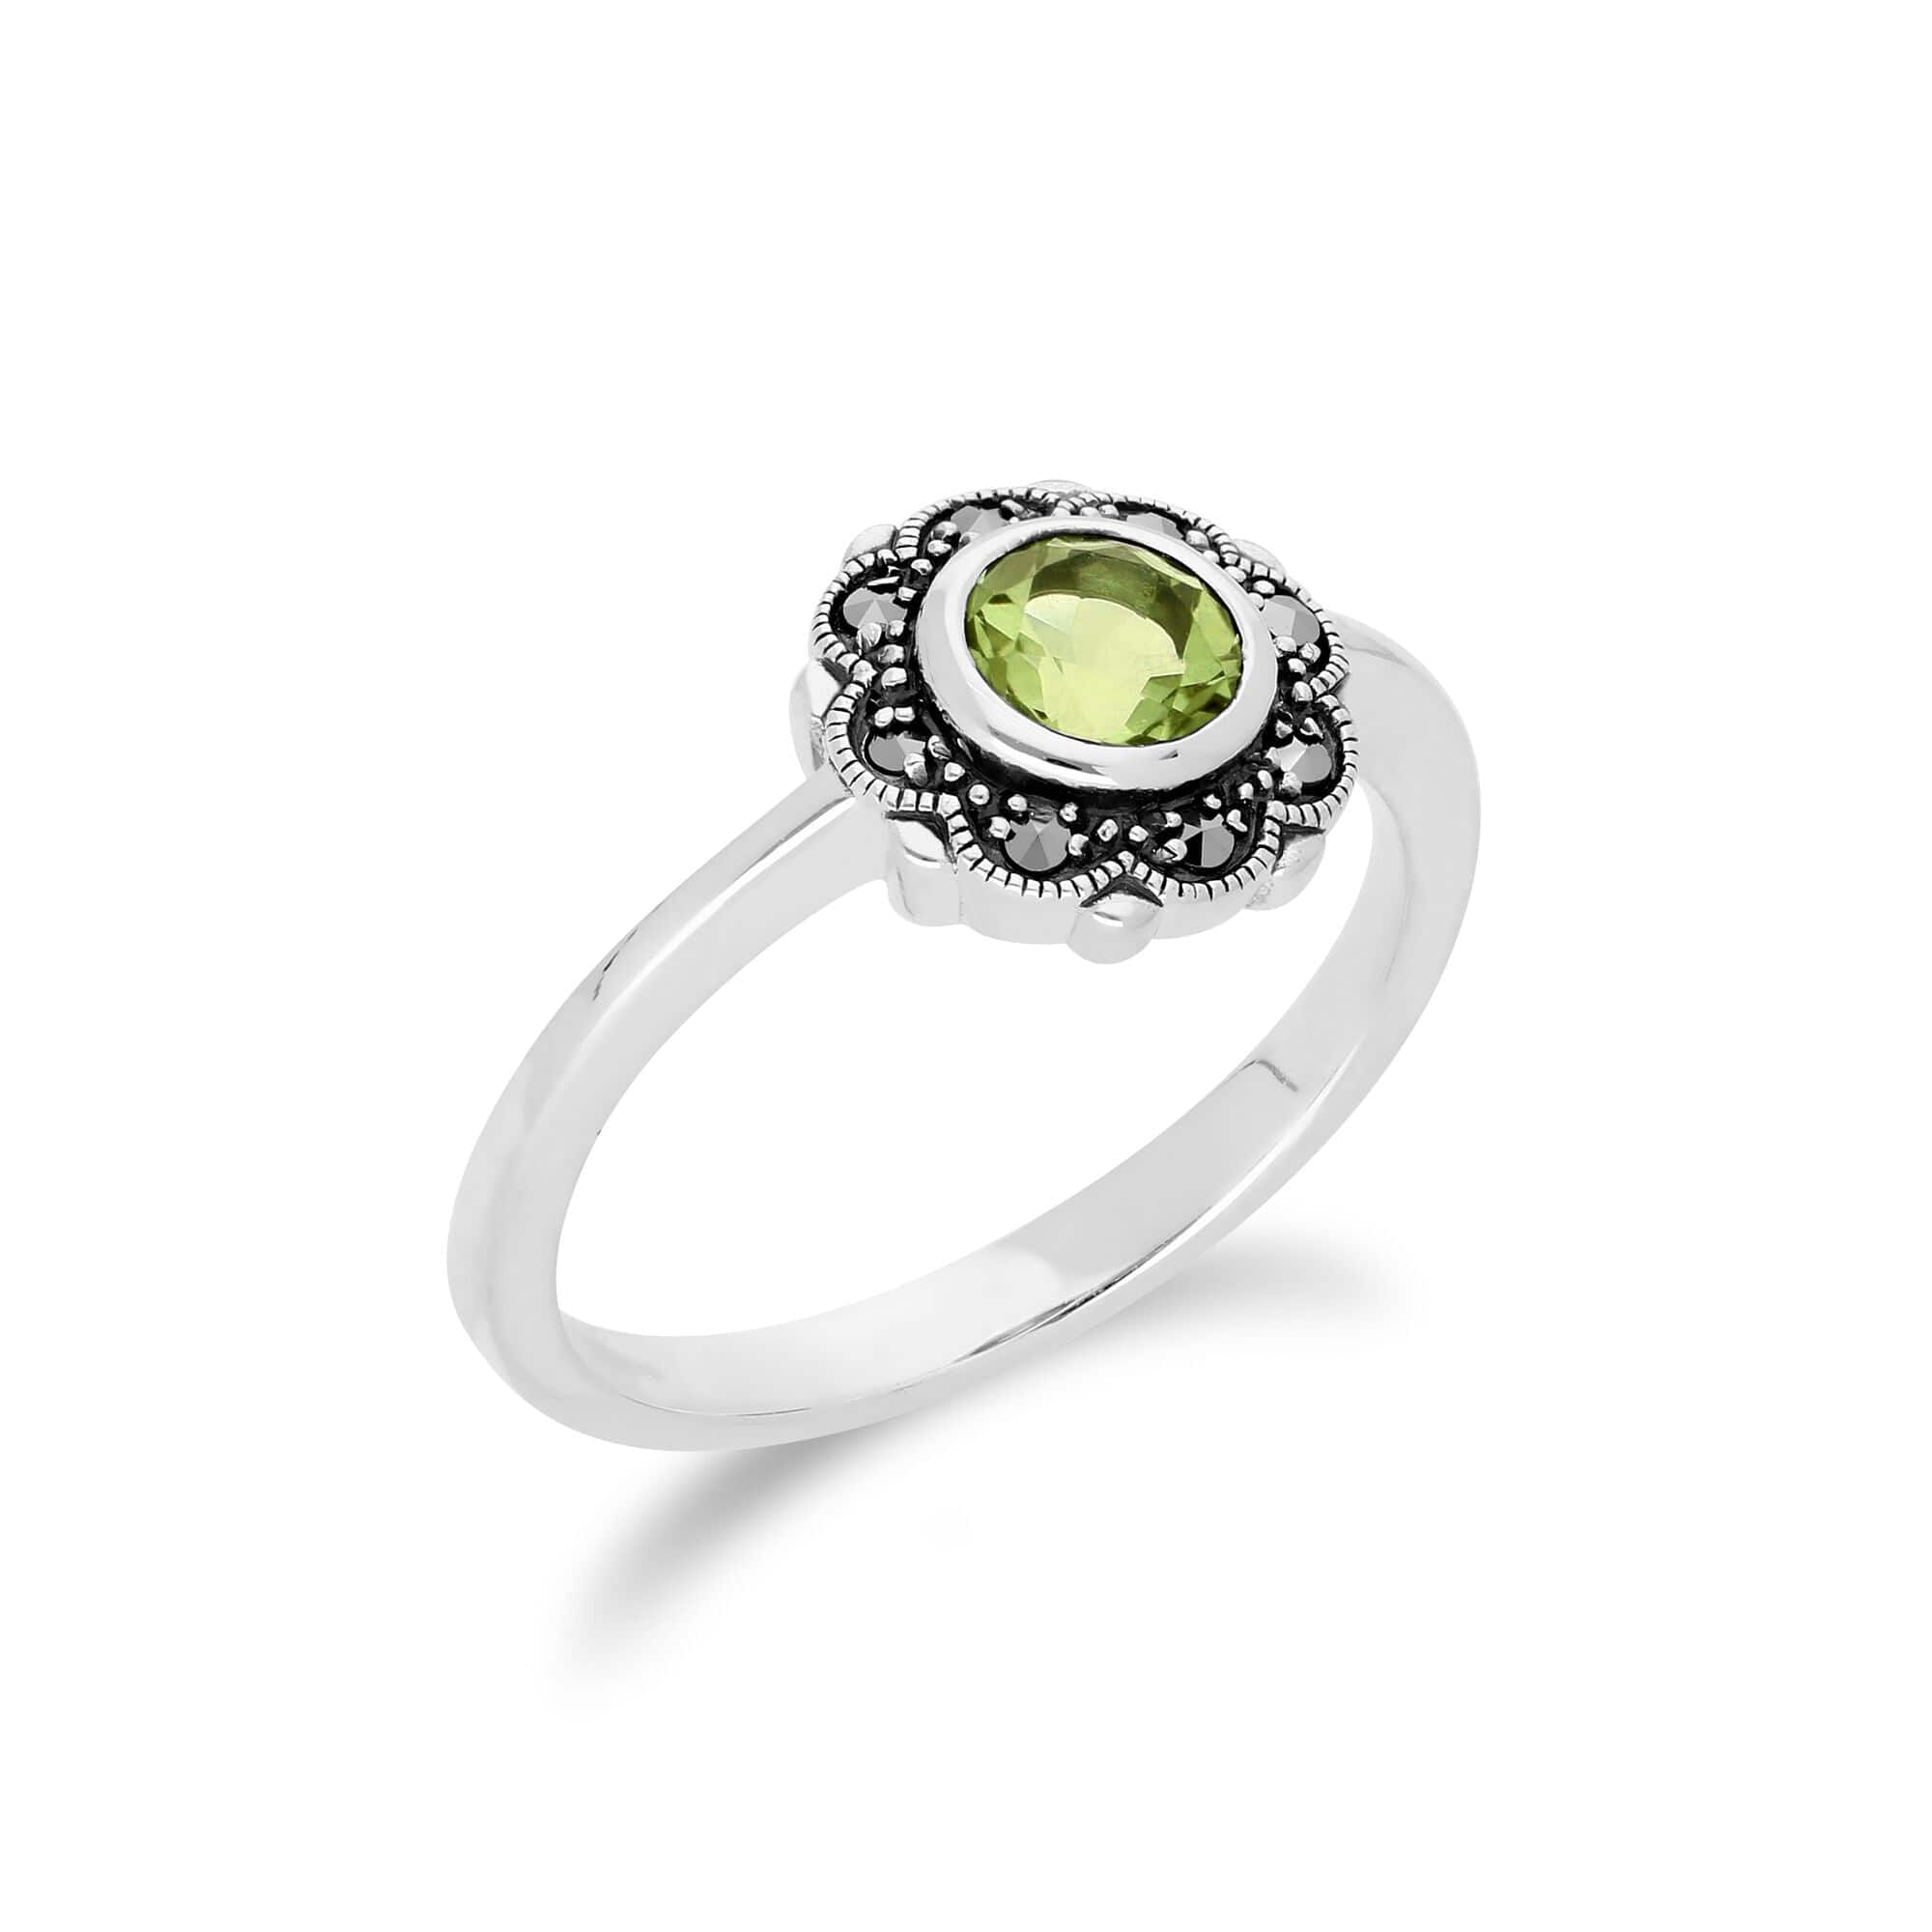 214R597004925 Floral Round Peridot & Marcasite Halo Ring in 925 Sterling Silver 2